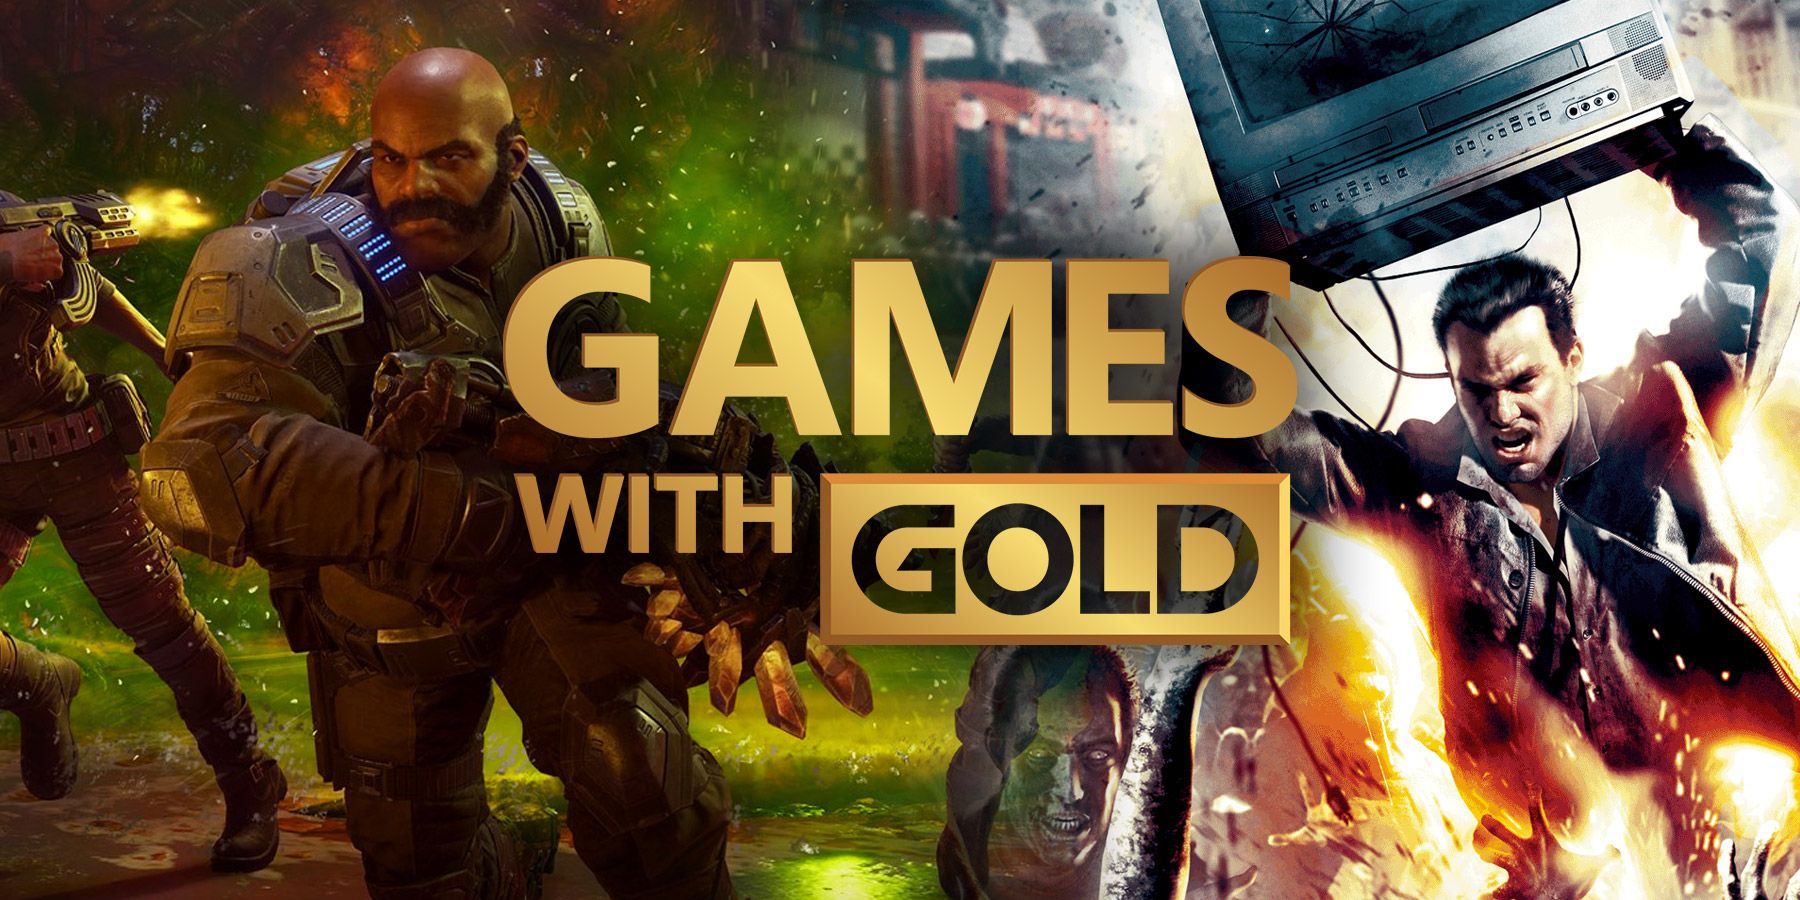 Games with Gold June 2021: Xbox free games update - EIGHT Game